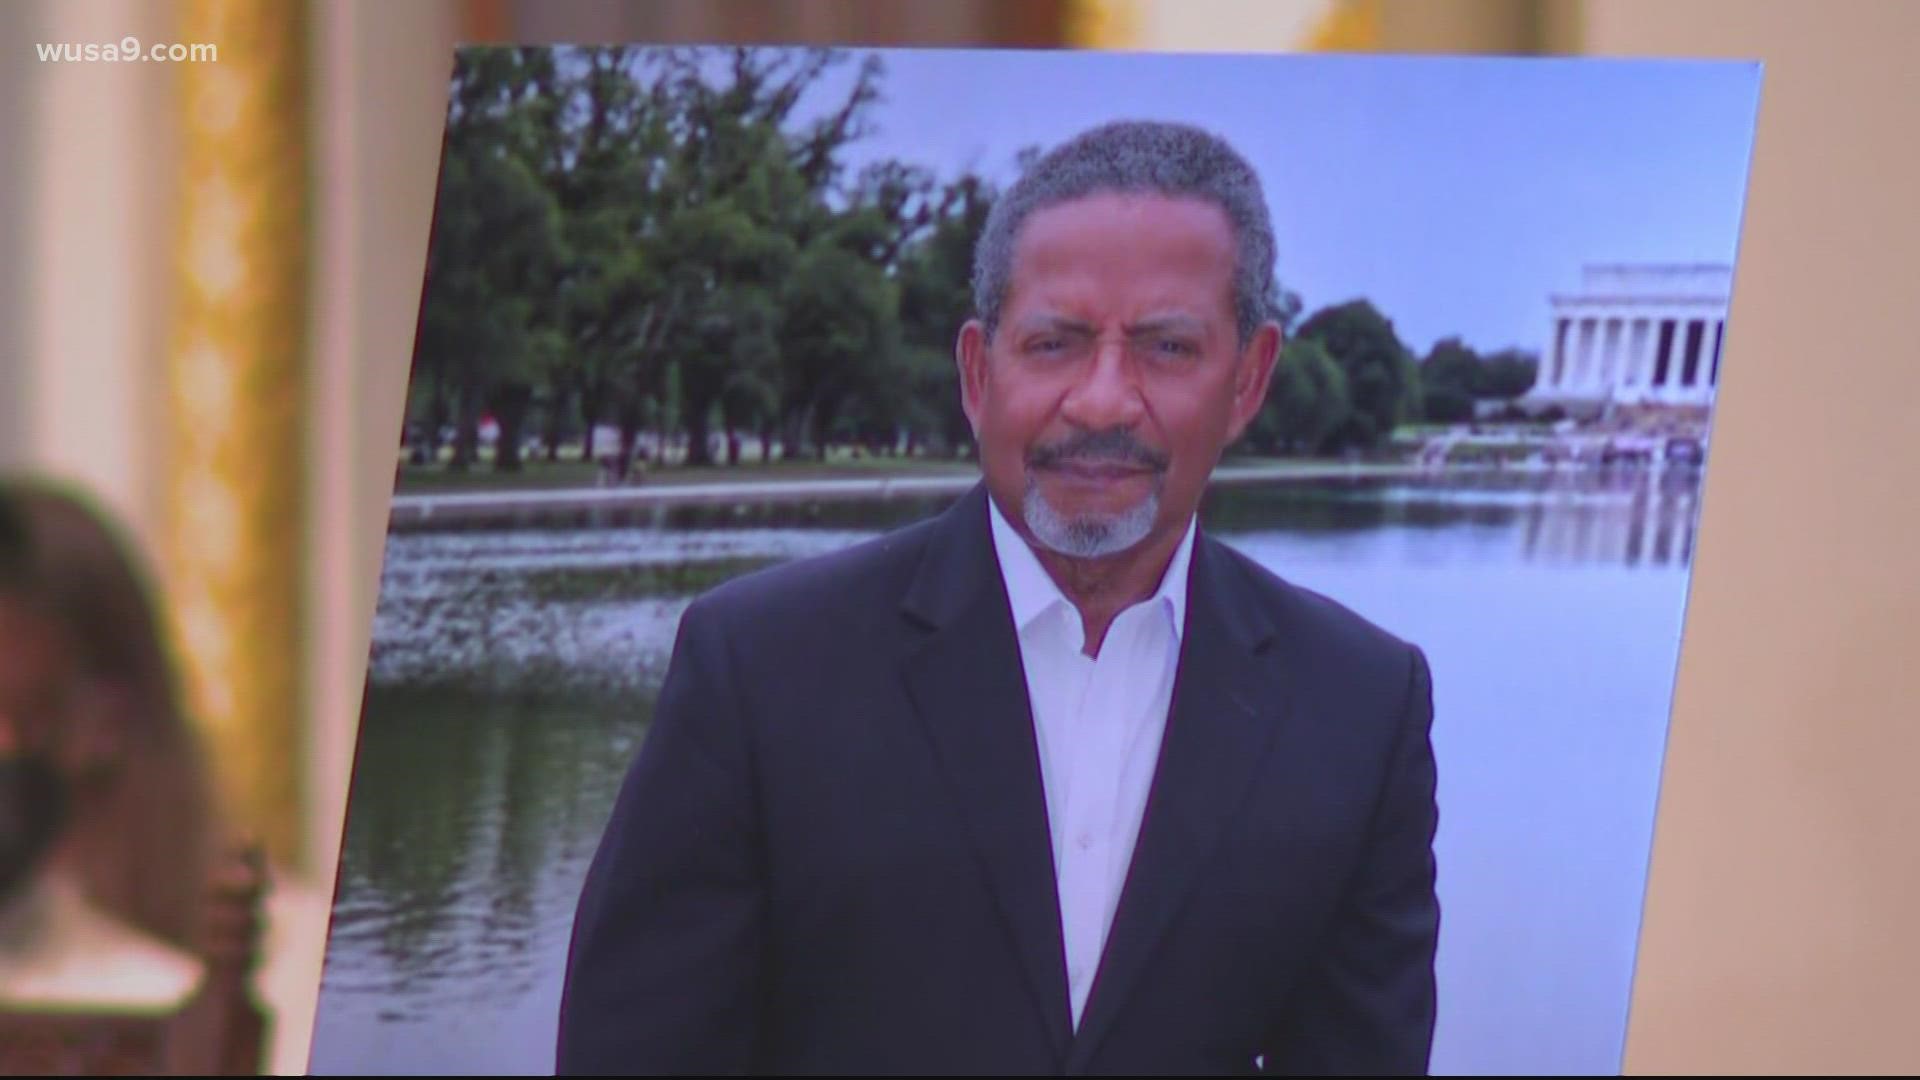 Bruce Johnson, a beloved longtime WUSA9 anchor, died of heart failure in Delaware. He was 71.